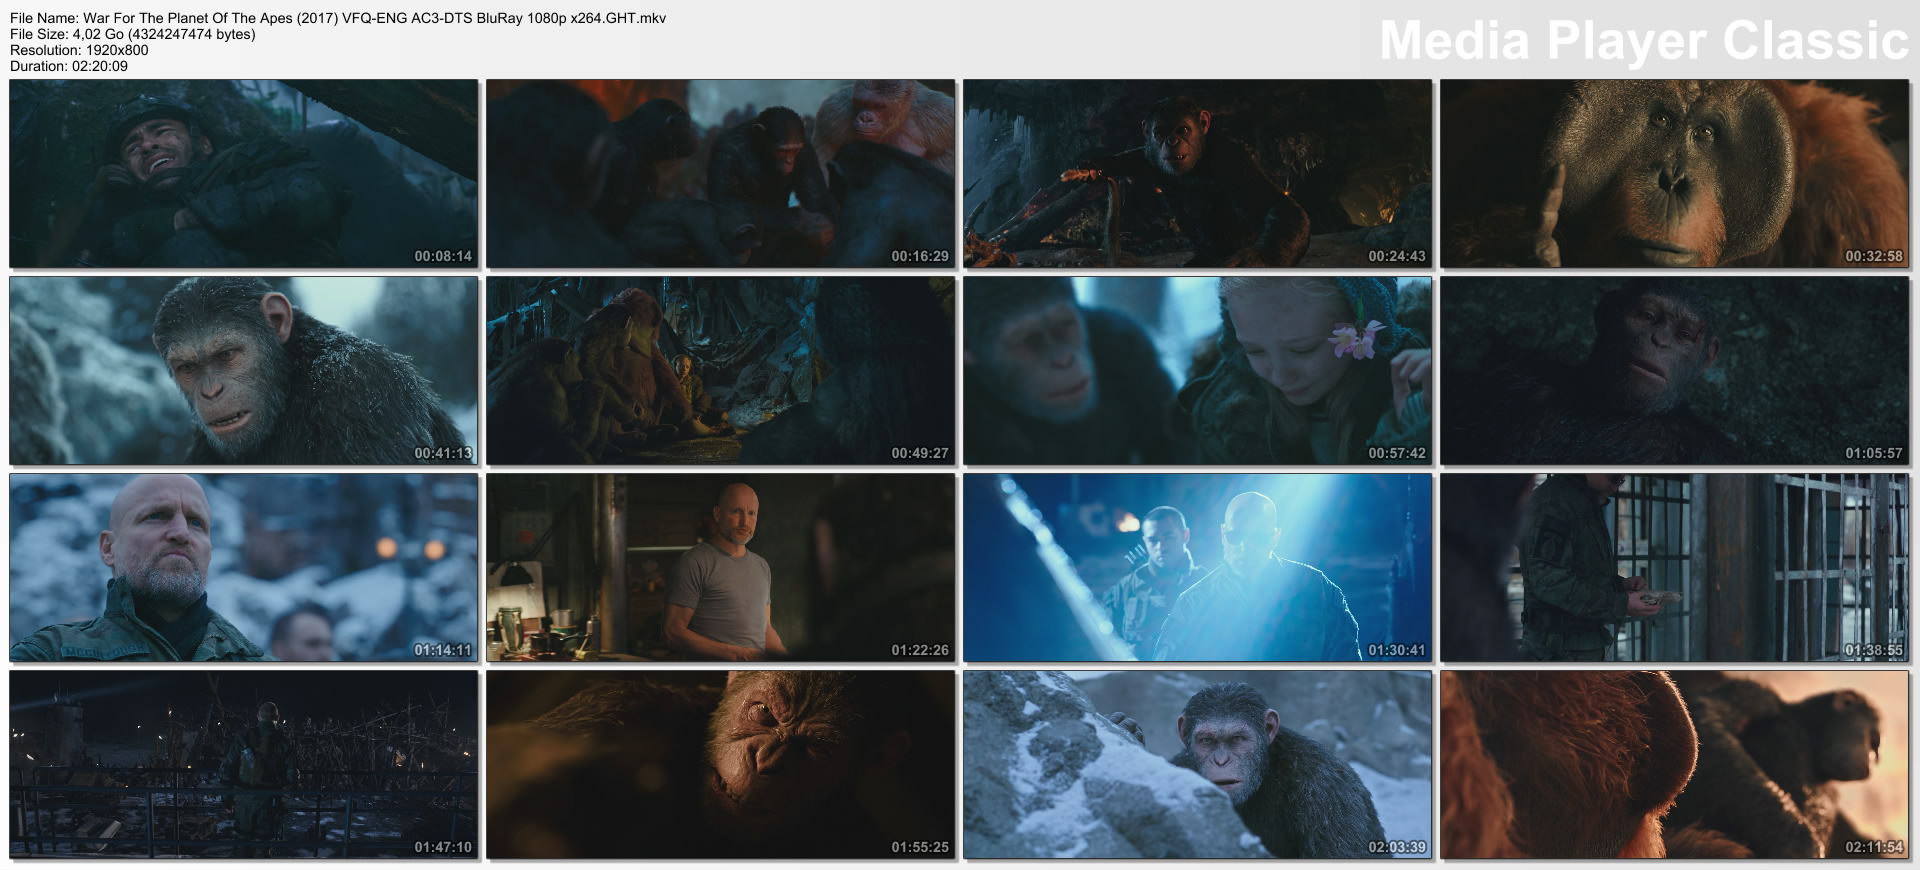 War For The Planet Of The Apes (2017) VFQ-ENG AC3-DTS BluRay 1080p x264.GHT